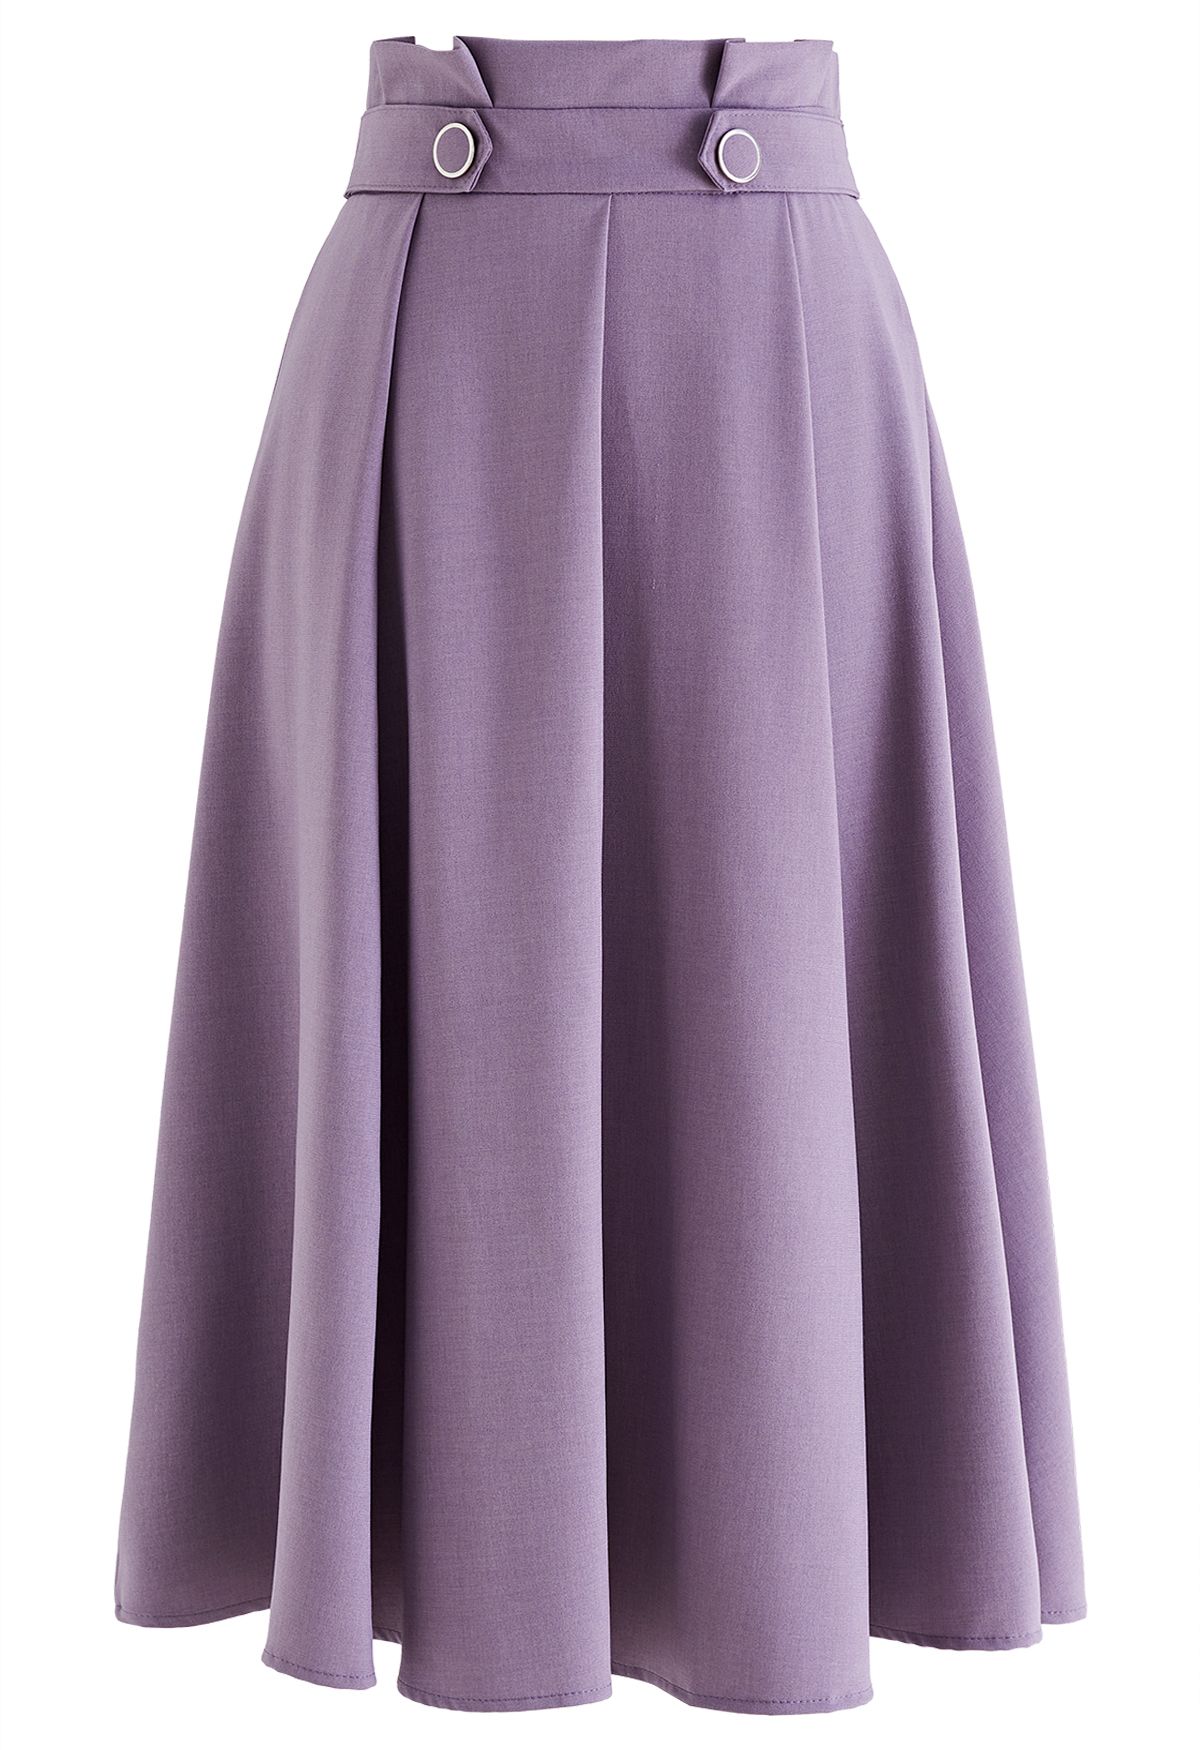 Pleated Buttoned Waist A-Line Midi Skirt in Lilac - Retro, Indie and ...